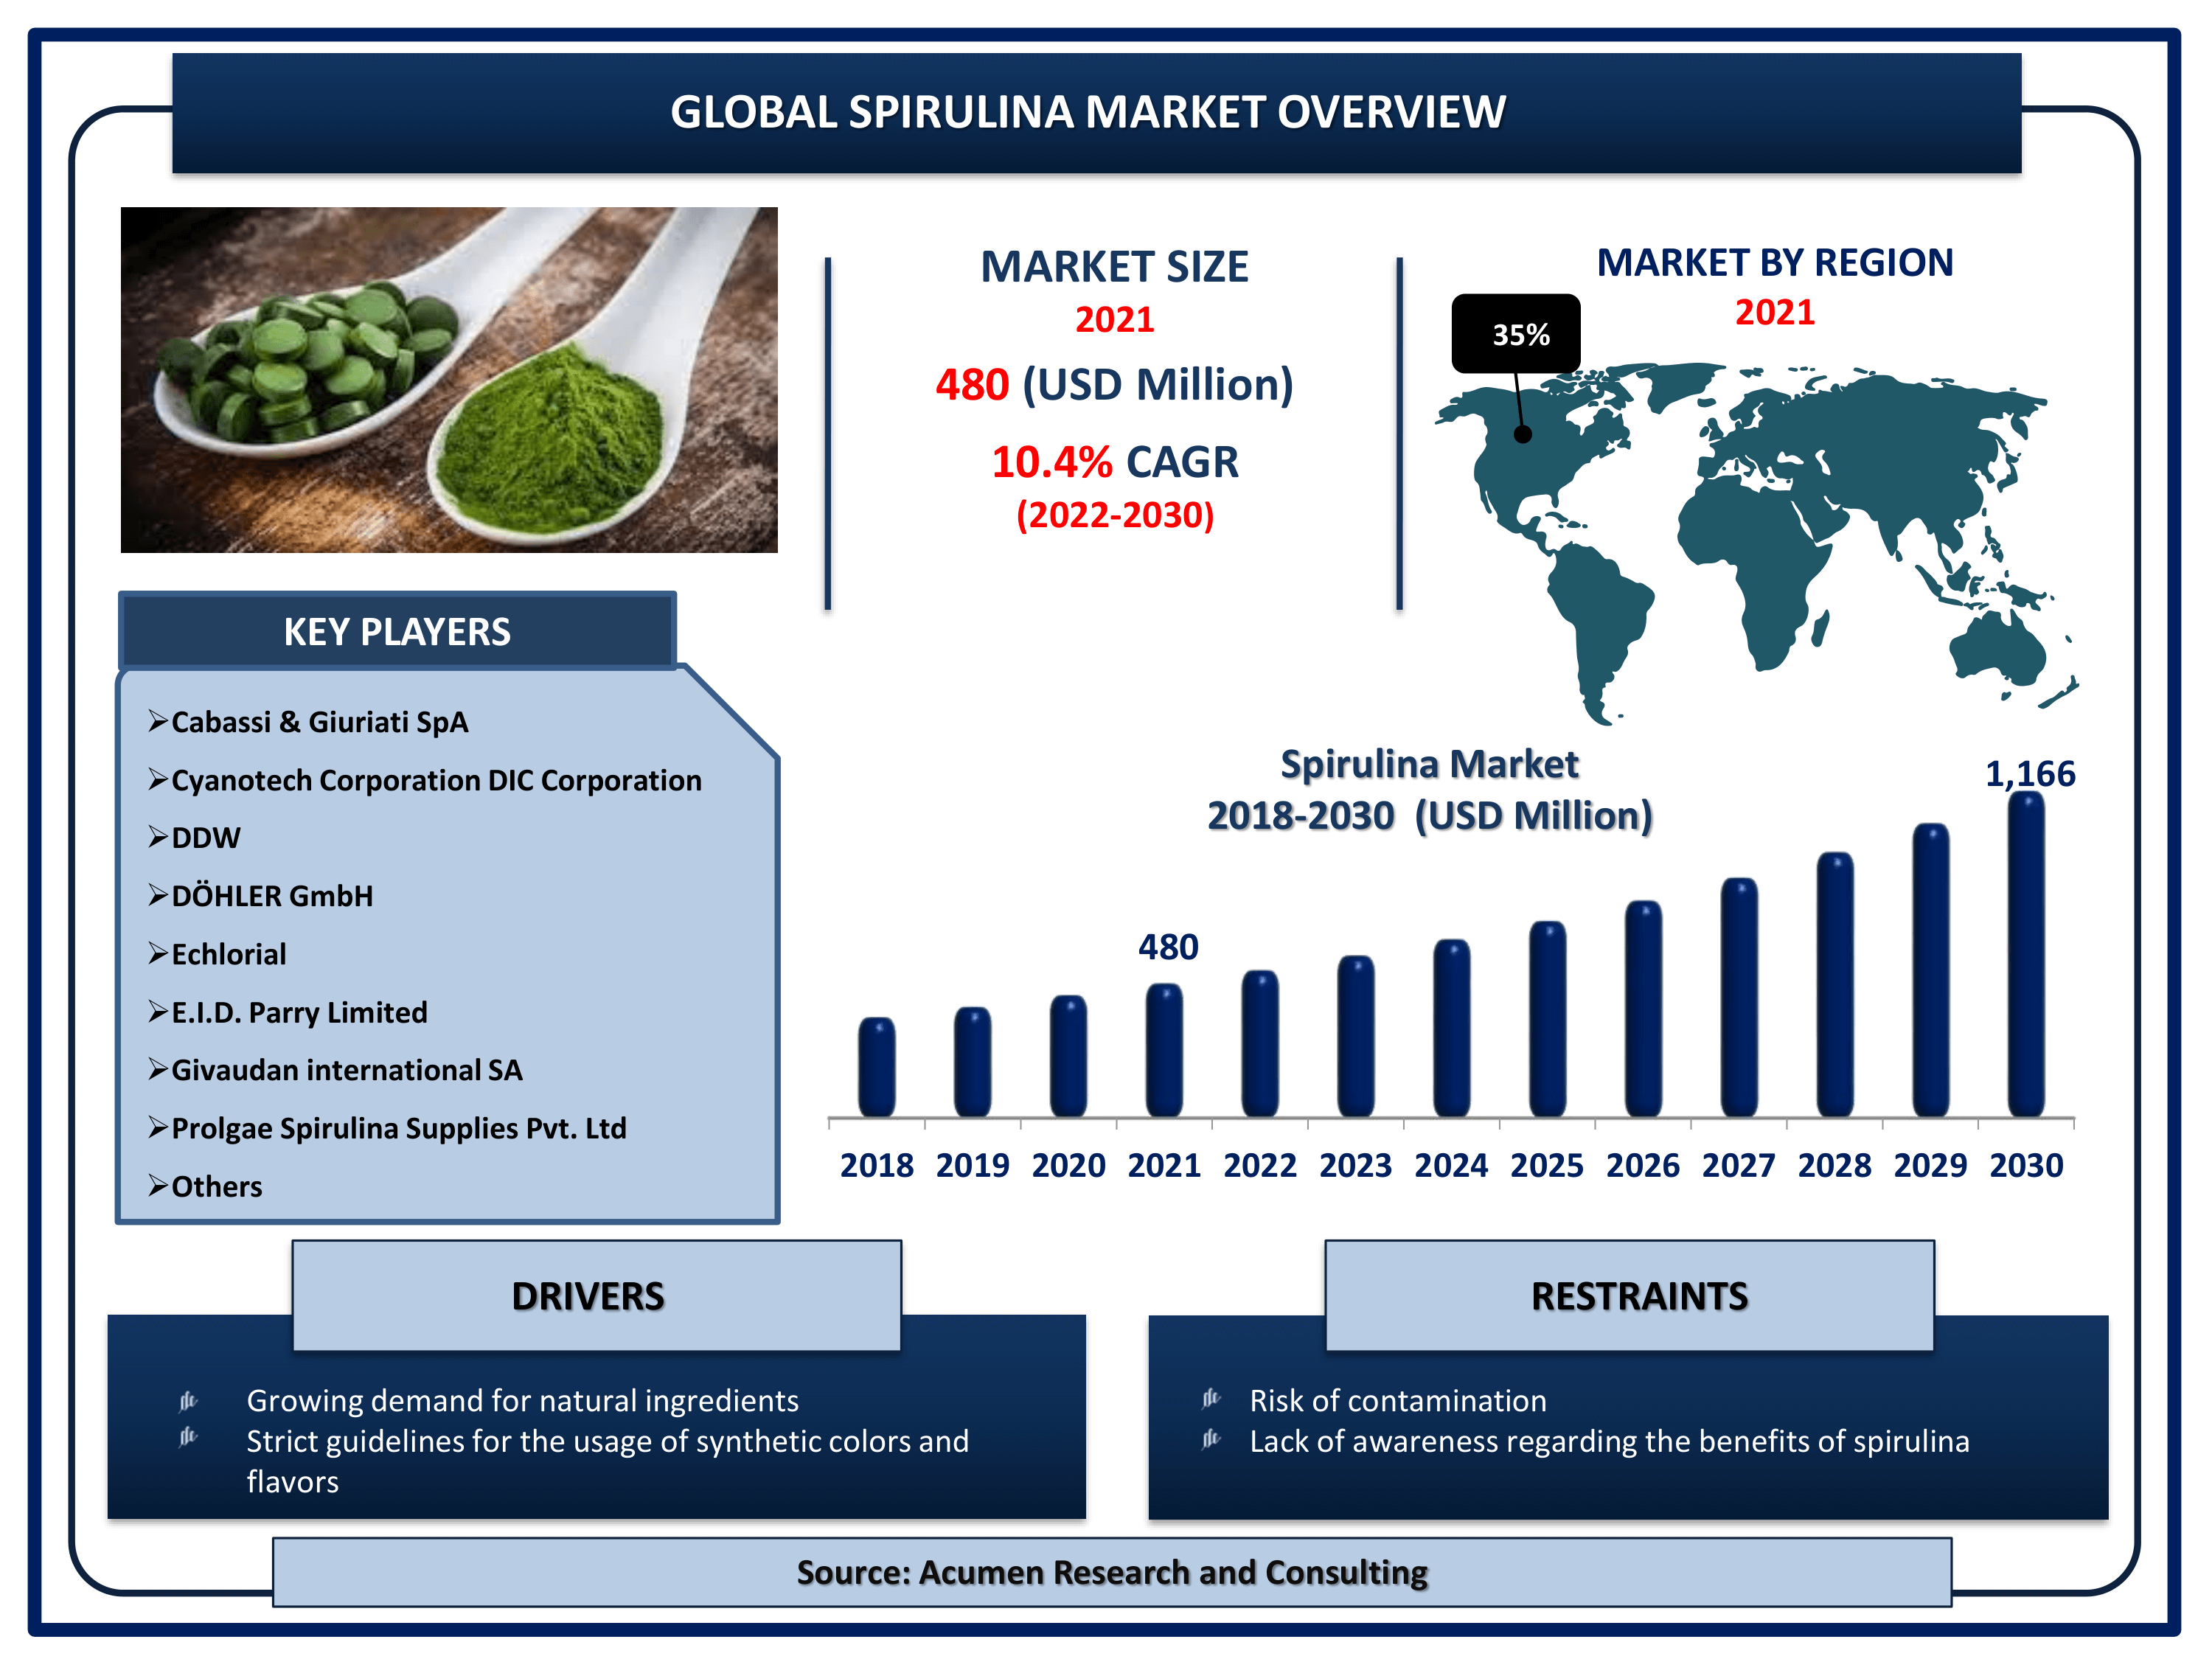 Global spirulina market revenue is estimated to reach USD 1,166 Million by 2030 with a CAGR of 10.4% from 2022 to 2030